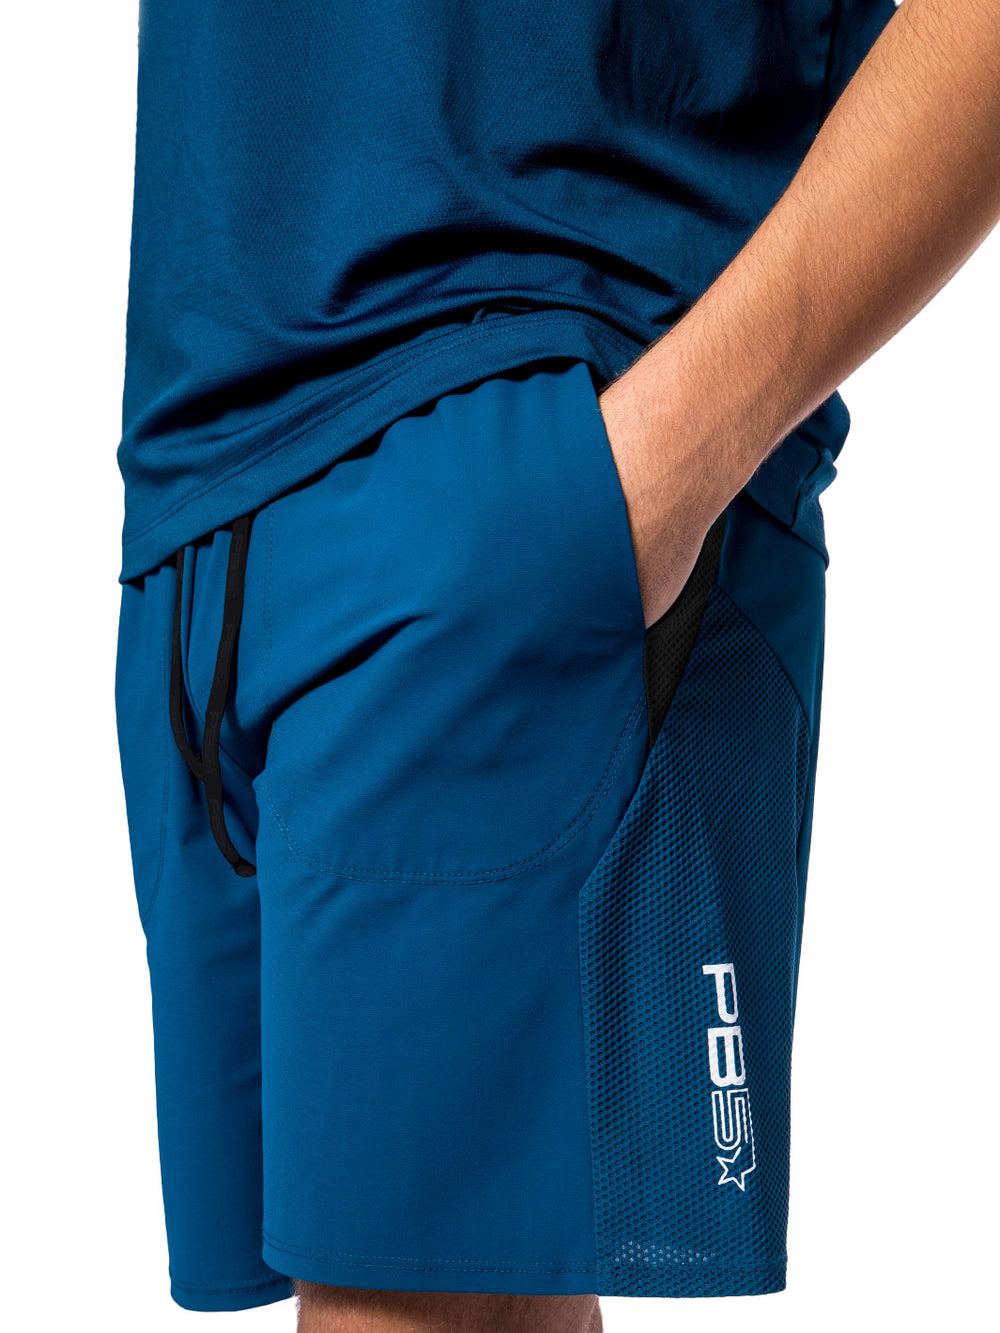 Side view of a man wearing PB5star astral blue Vented Court Shorts, highlighting the mesh fabric for enhanced airflow.